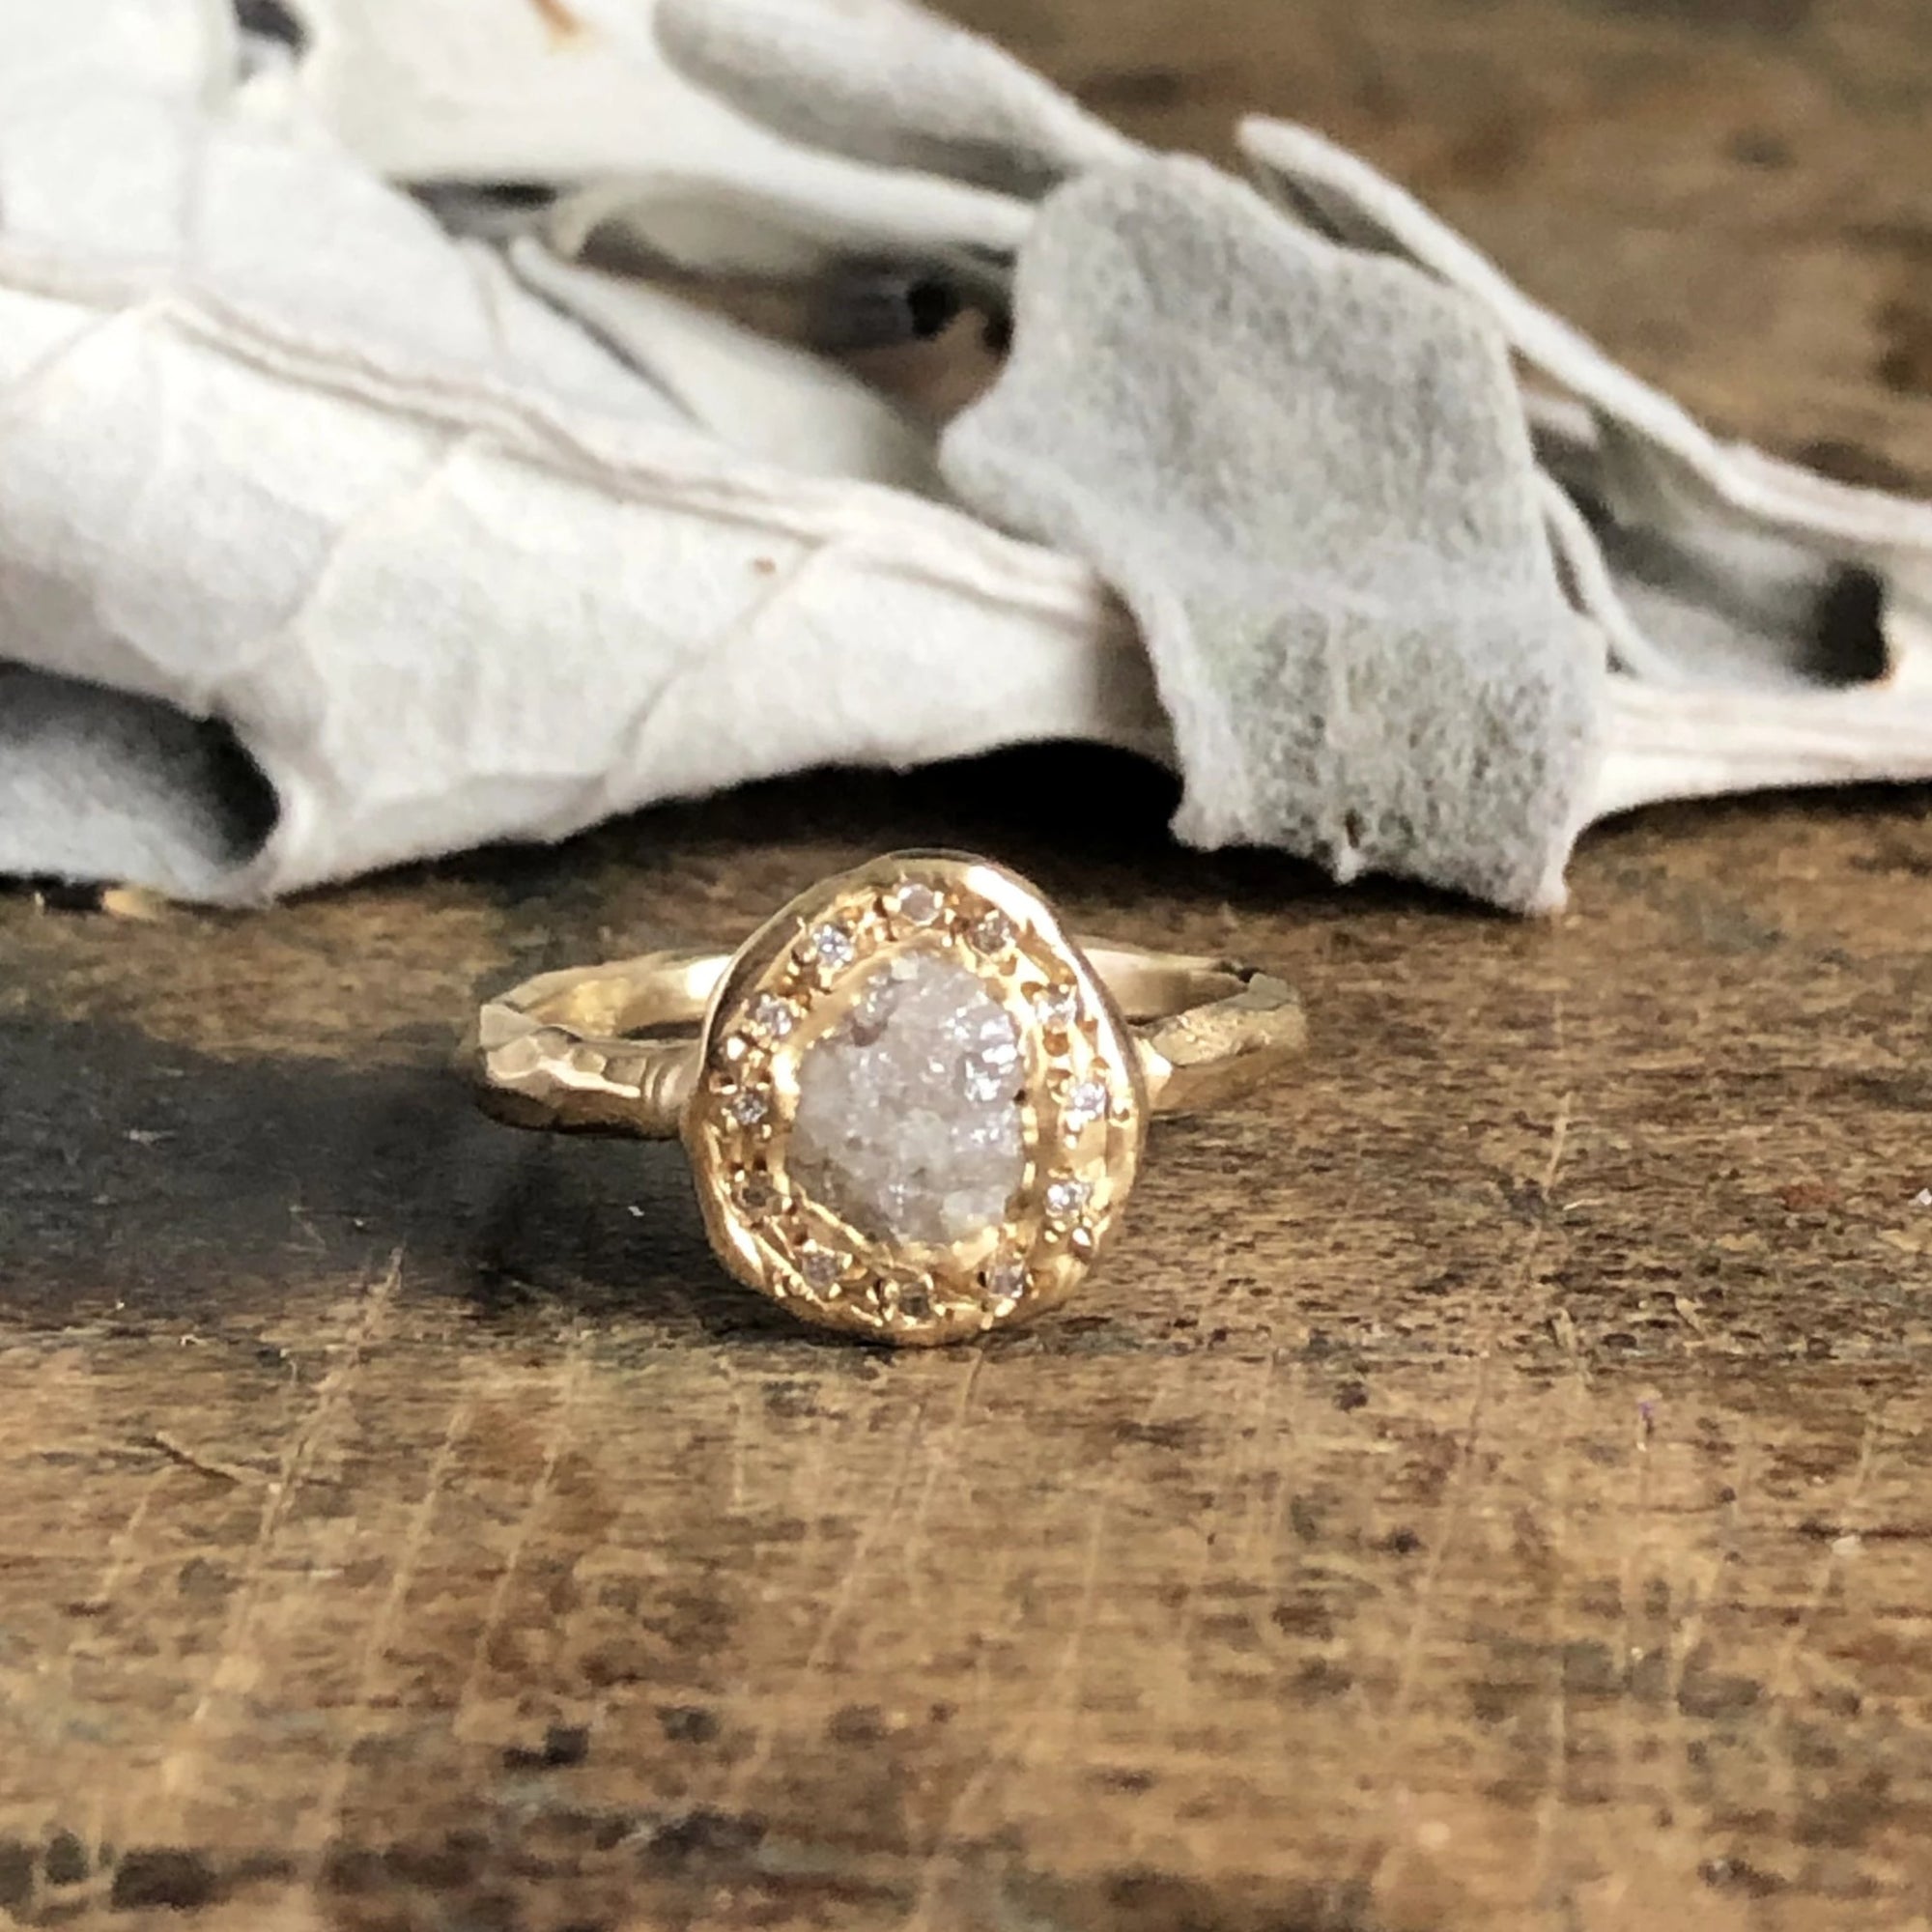 22 Raw, Rustic, and Rough Diamond Engagement Rings